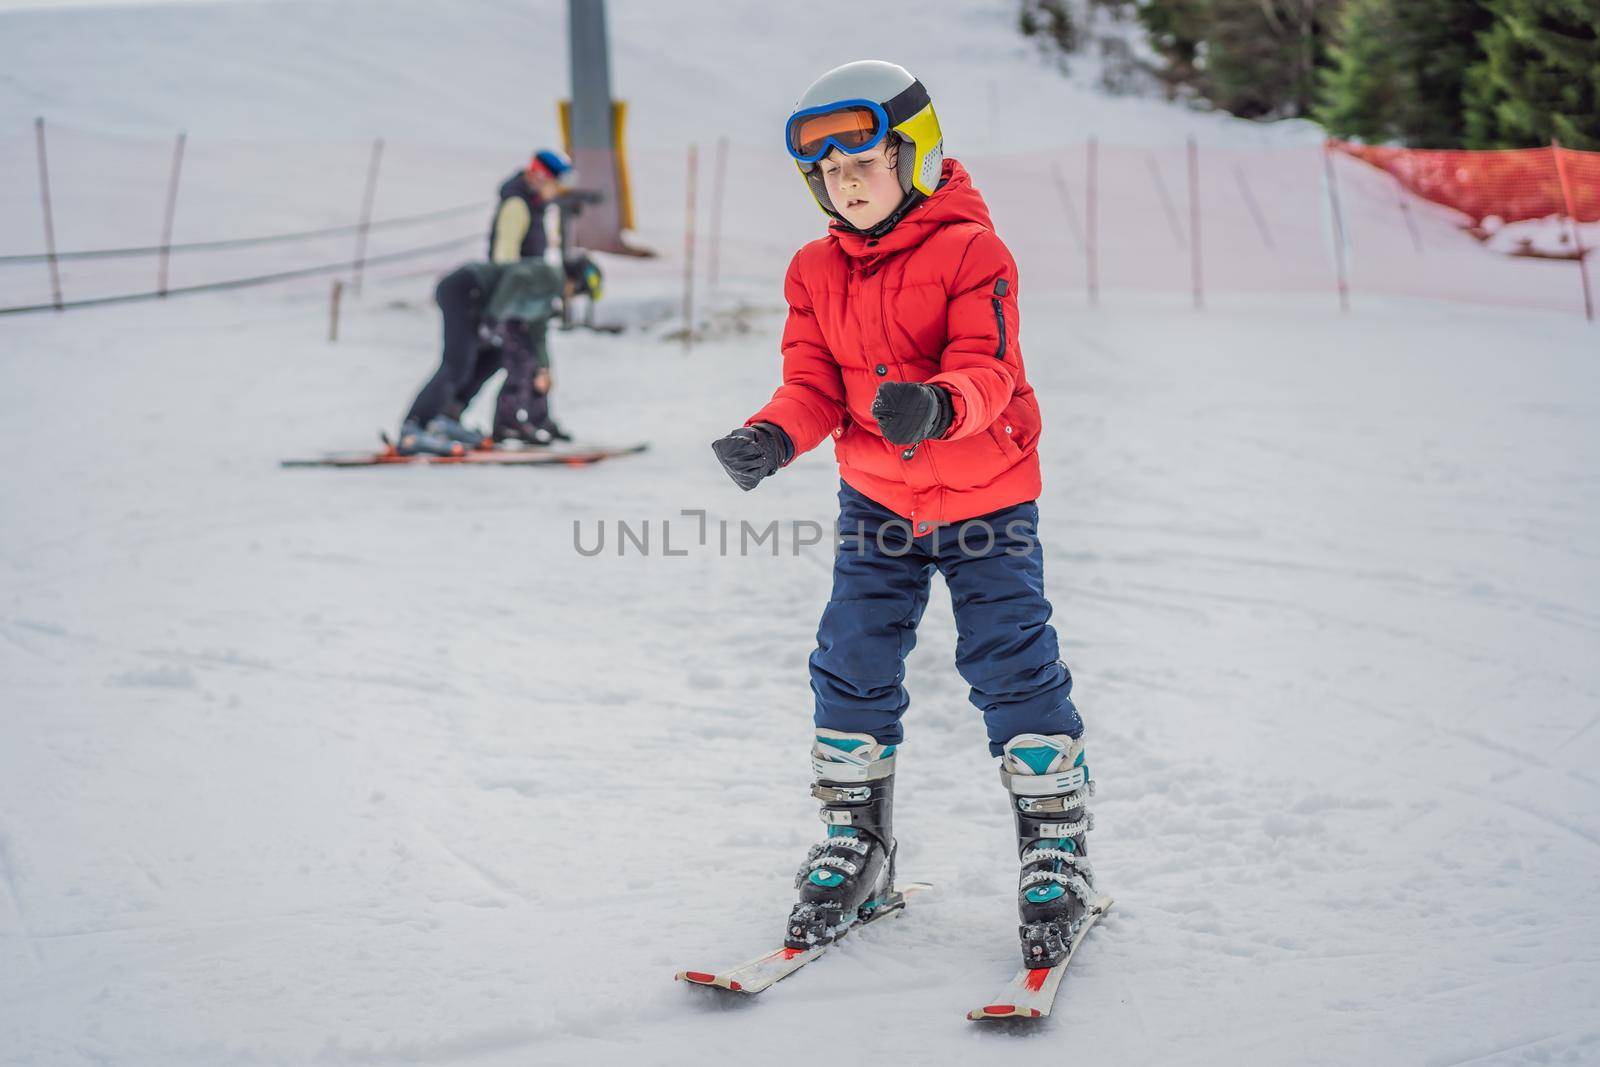 Child skiing in mountains. Active toddler kid with safety helmet, goggles and poles. Ski race for young children. Winter sport for family. Kids ski lesson in alpine school. Little skier racing in snow.